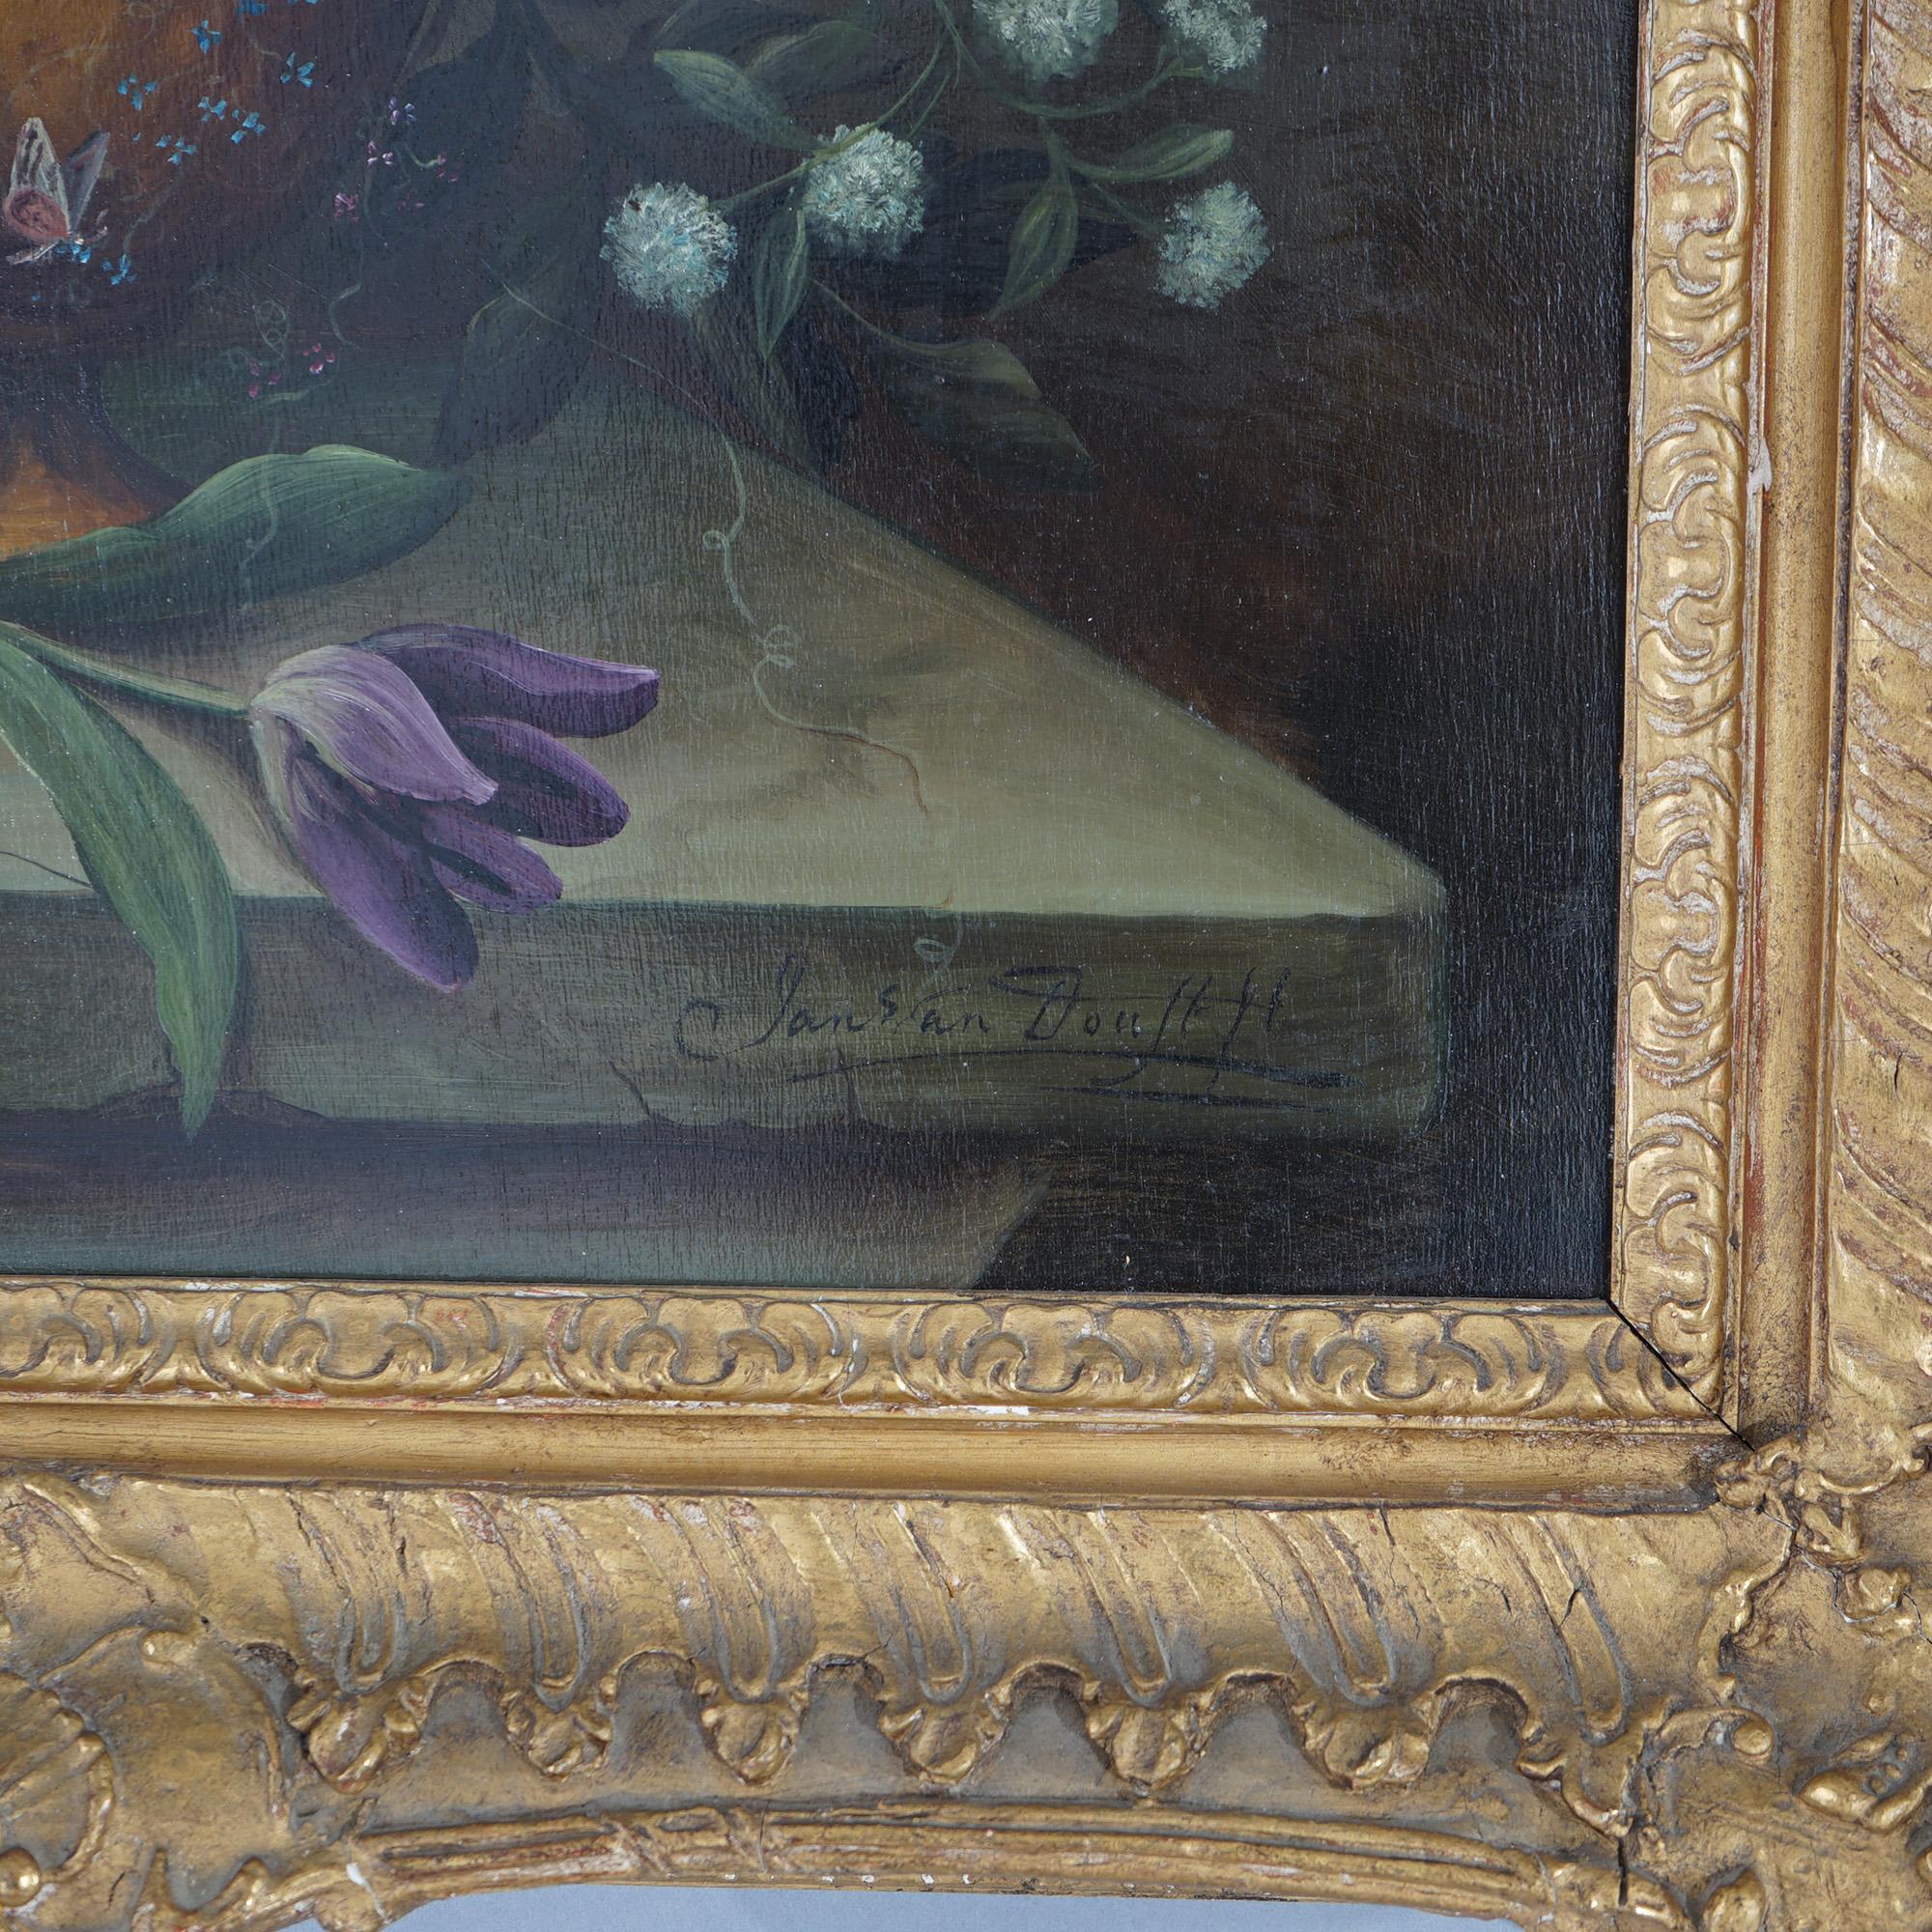 Antique Still Life with Flowers & Butterflies on a Stone Ledge by Jan Van Doust 1